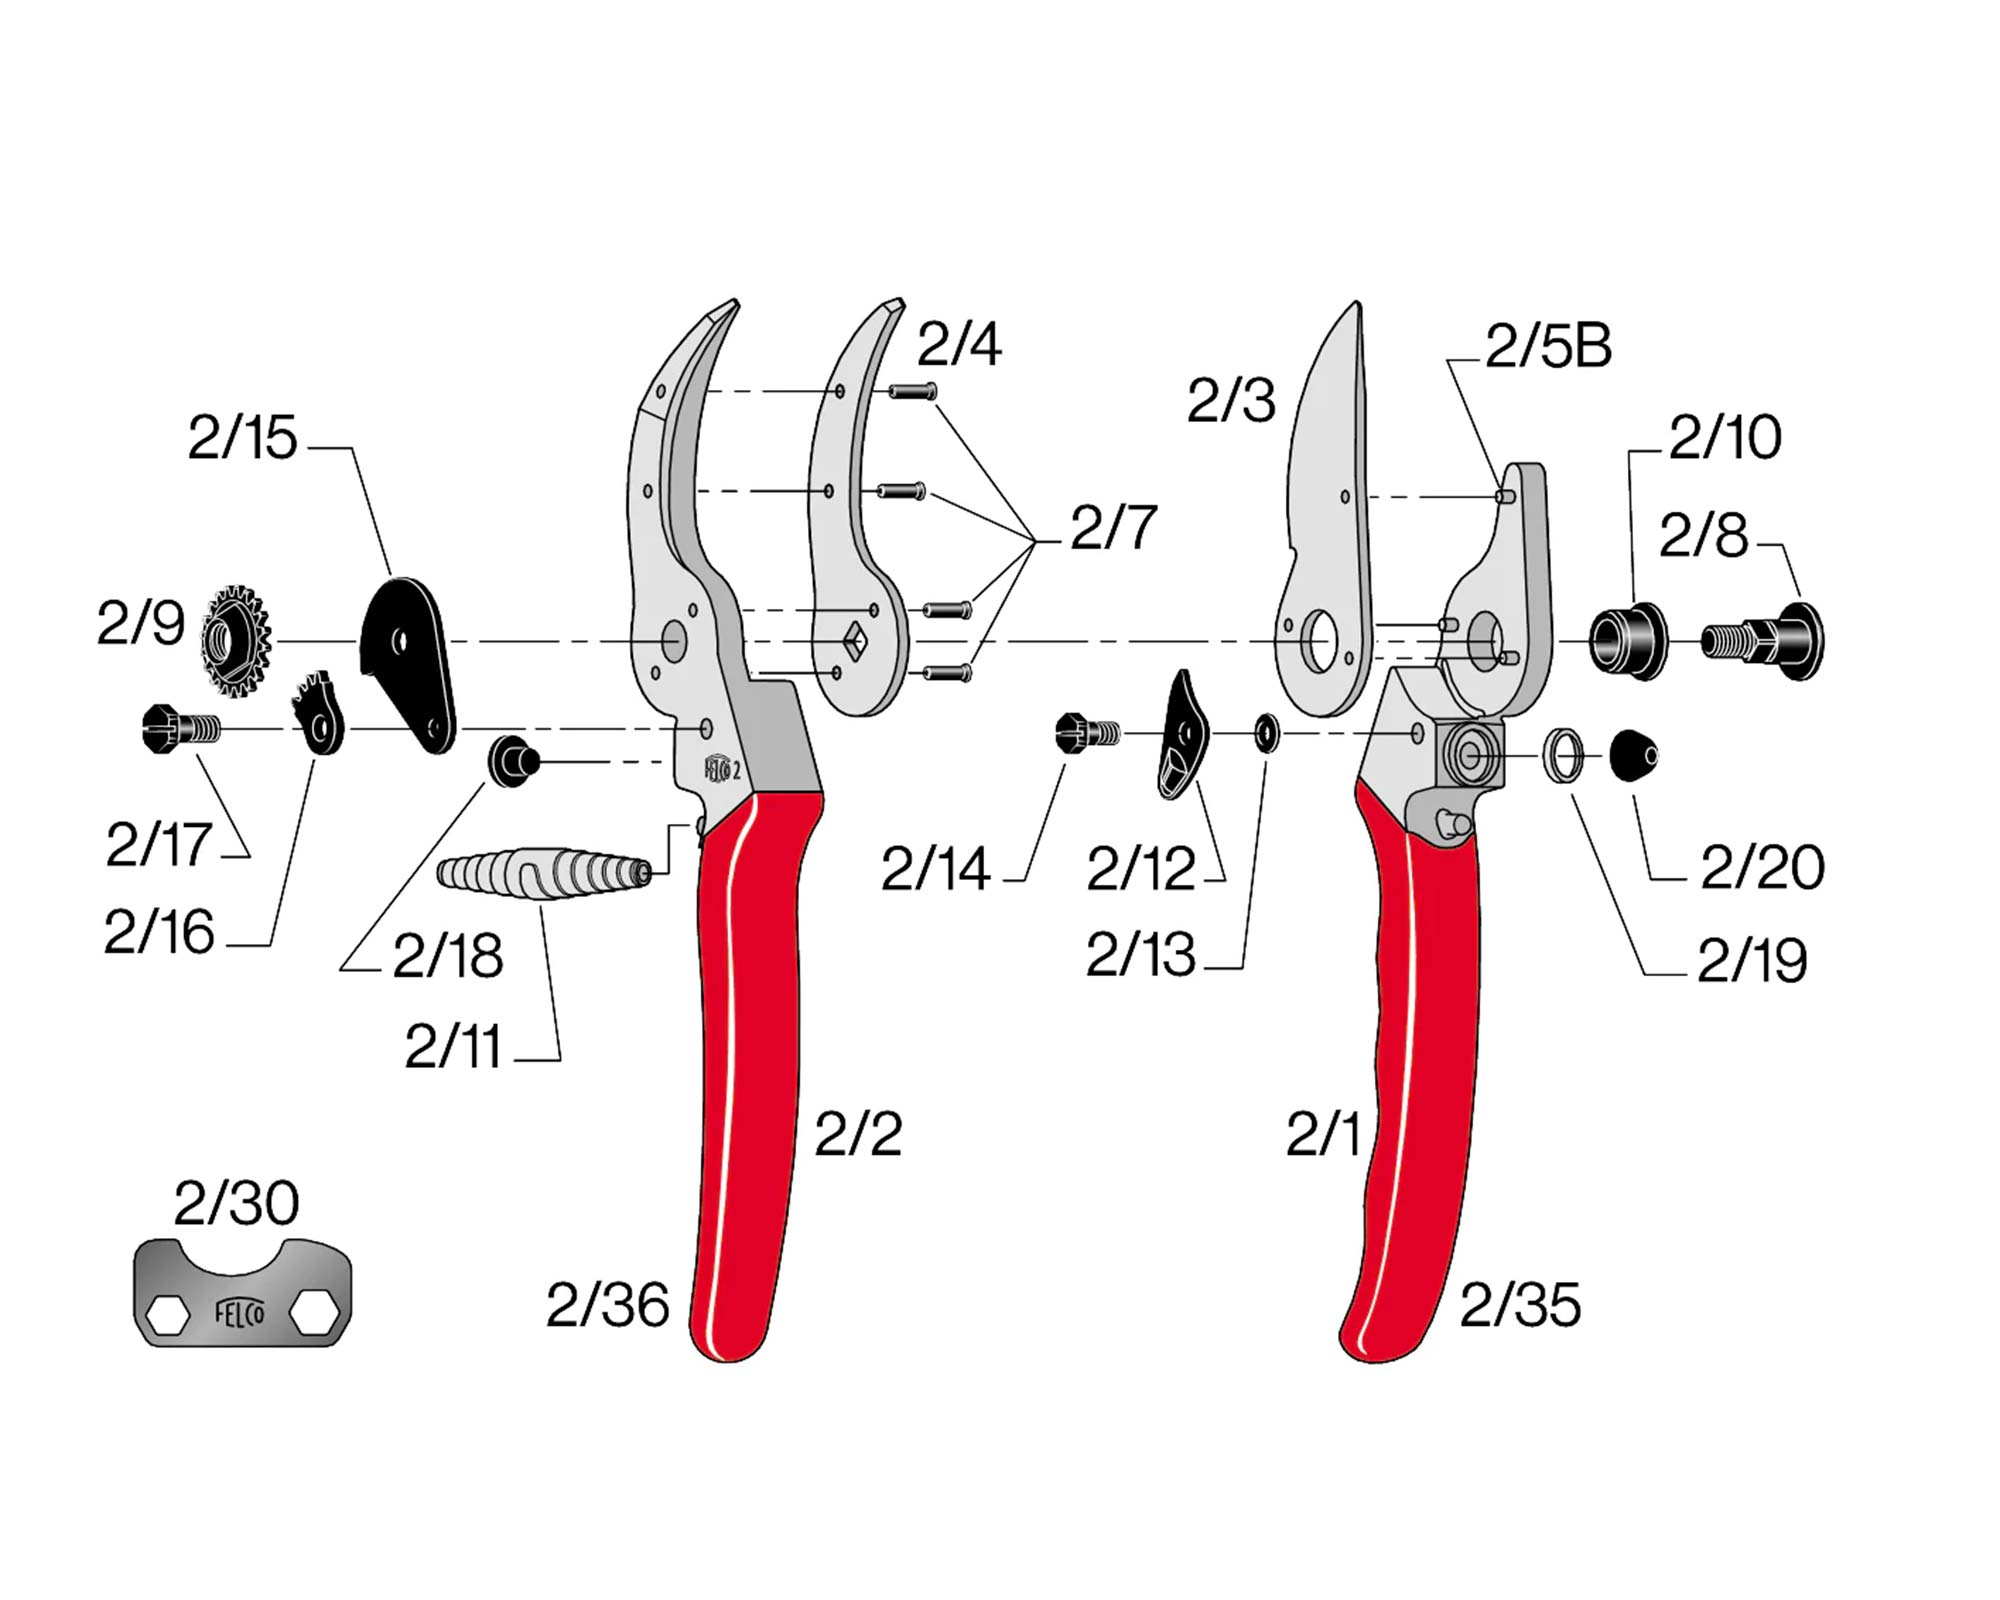 Exploded diagram showing the parts of the Felco2 secateur - the part in question here is the 2/4 which is the anvil blade - not the cutting blade